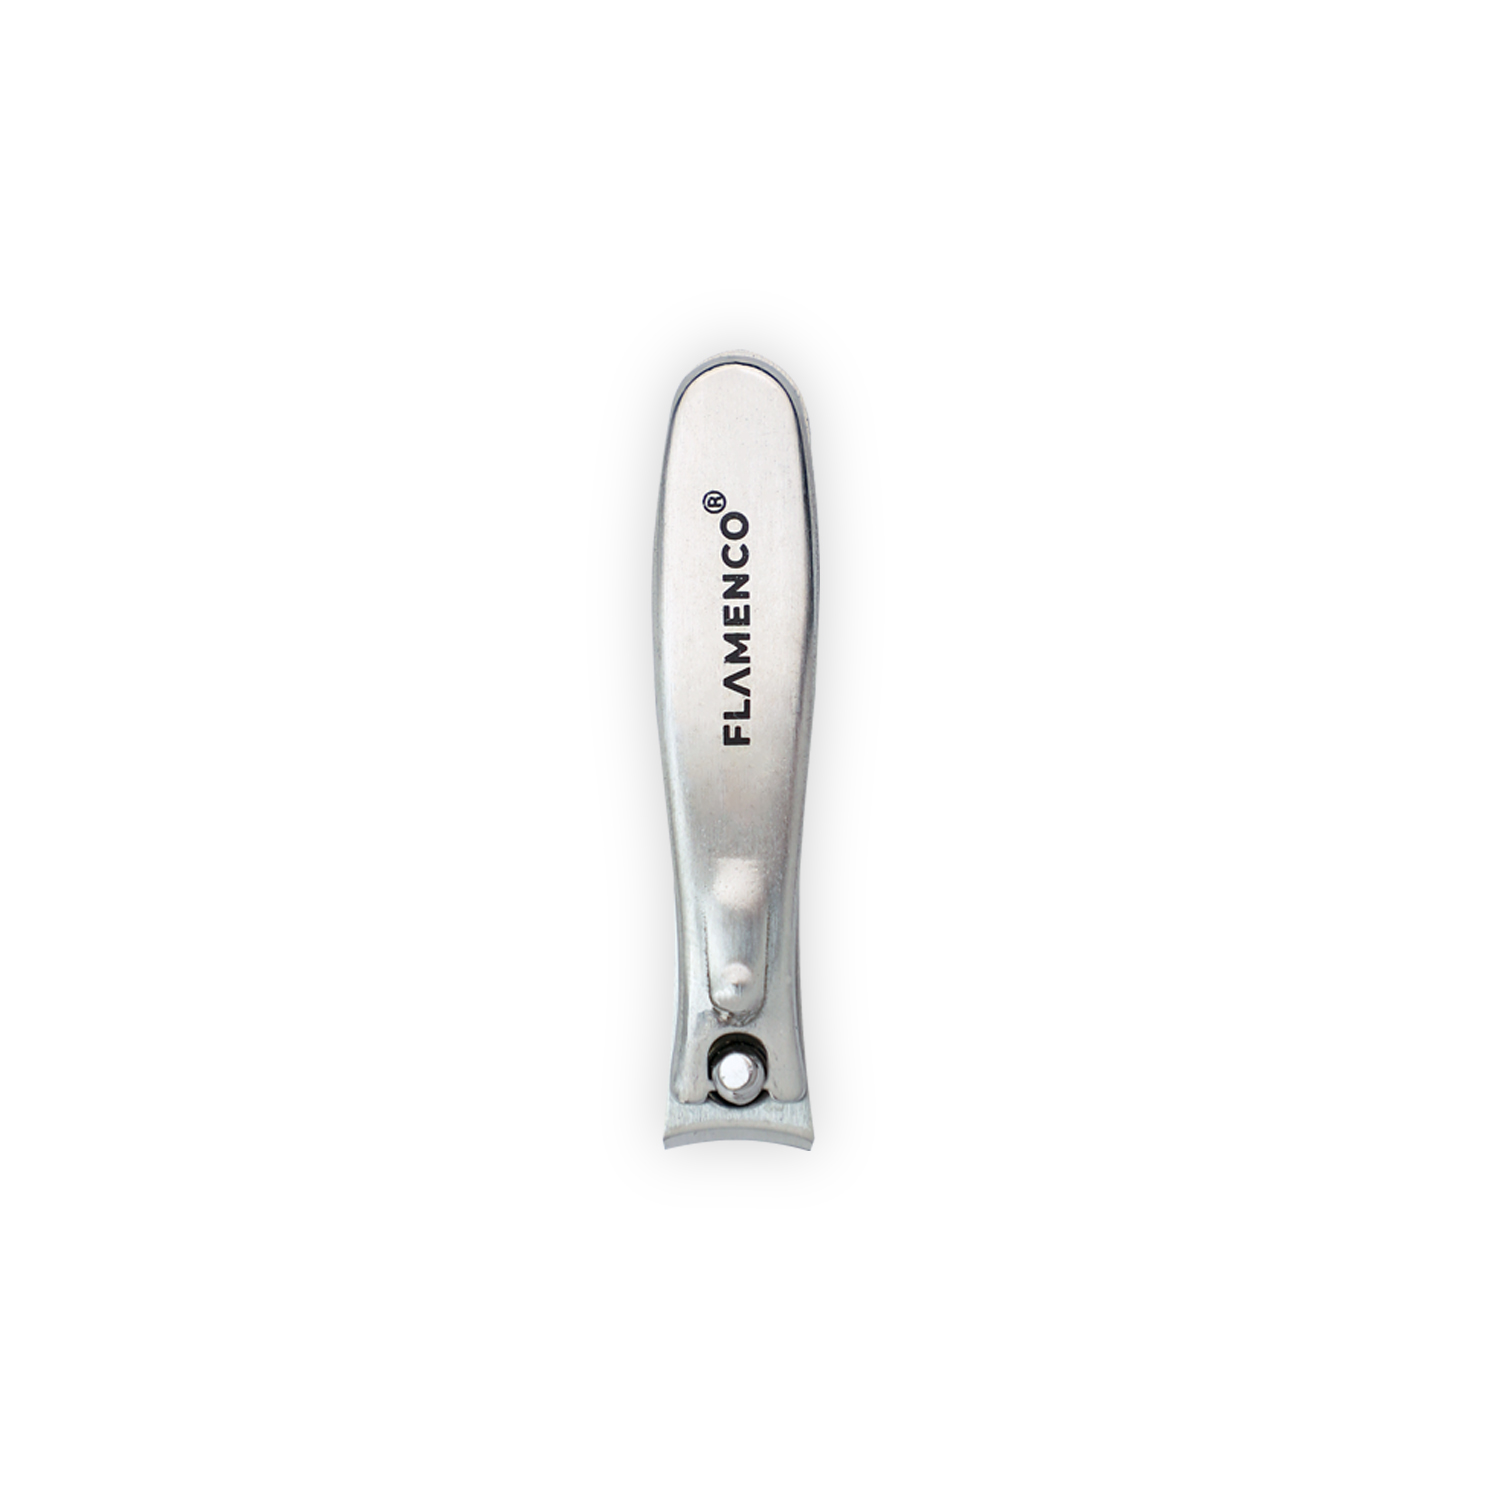 NAIL CLIPPERS MB 092234